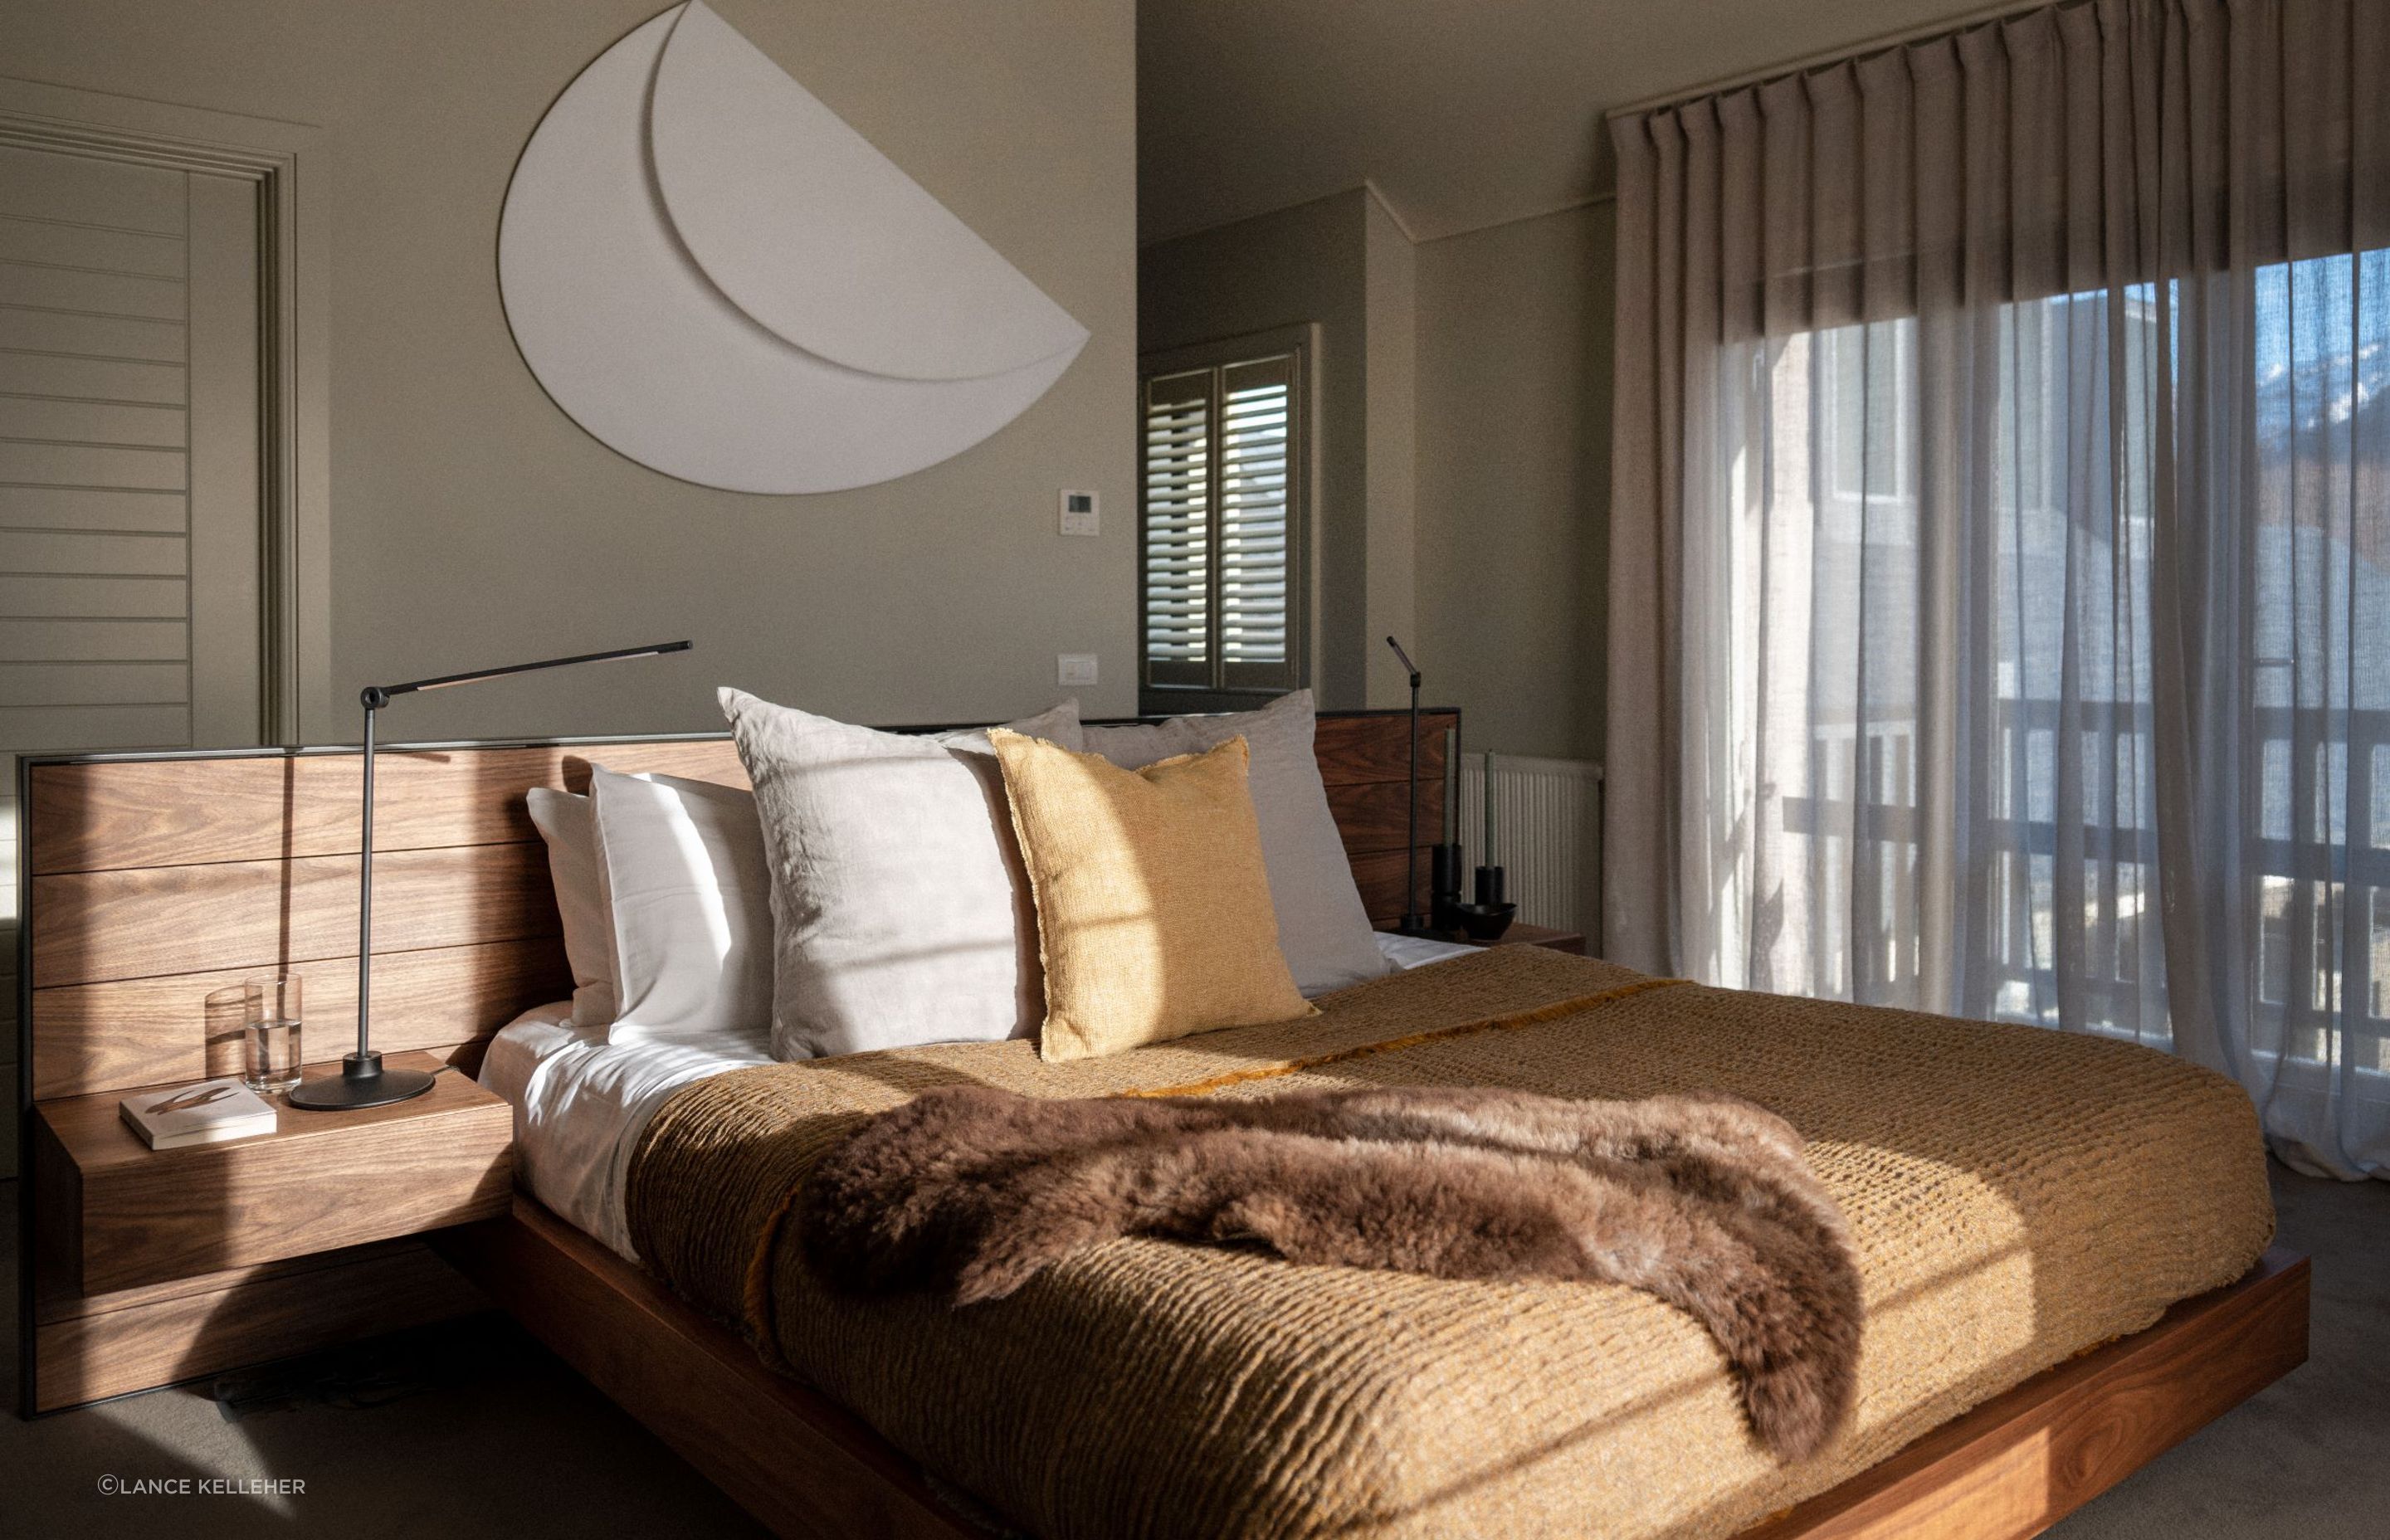 Combining textures, like the natural hardwood bed frame and soft bedding of this gorgeous South Island home, adds warmth and visual interest to a bedroom.